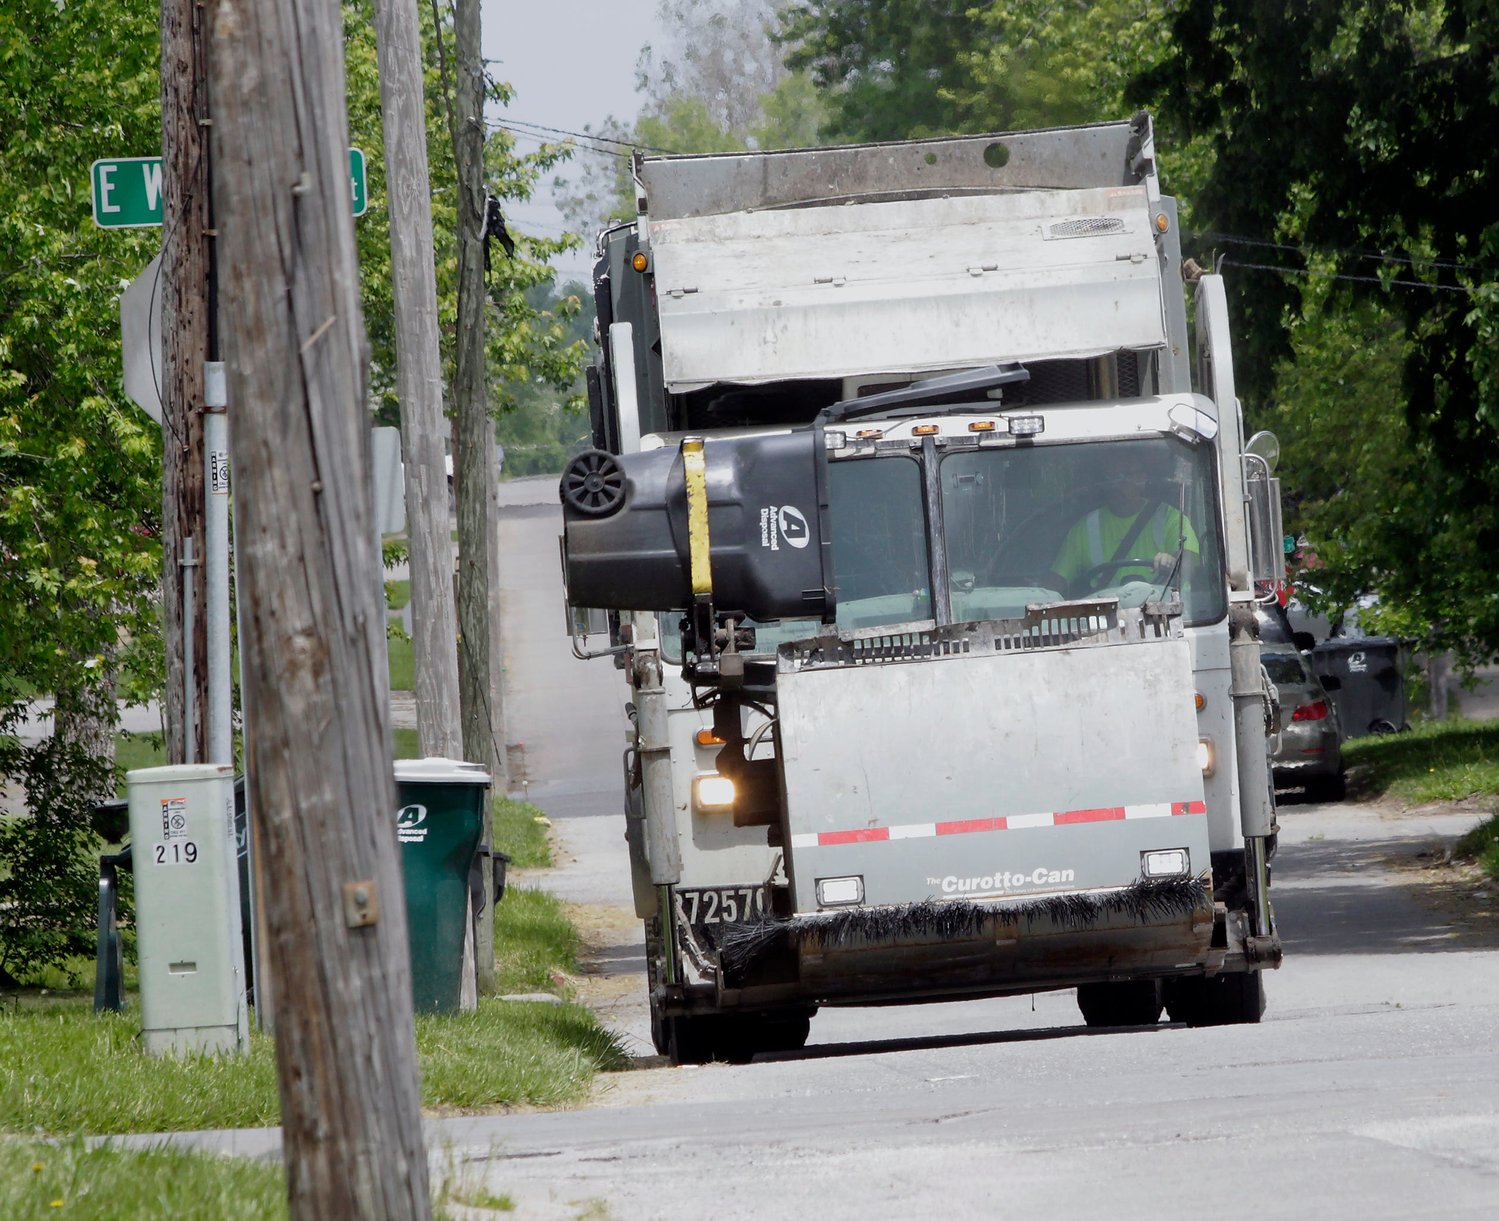 A driver with Advanced Disposal &amp; Waste Management Co. operates an automatic lift arm to grab a Moberly resident's trash container and dump its contents into a storage unit Wednesday. The Moberly City Council meets June 7 and is considering to amend its service agreement with Advanced Disposal that may affect changes in how local residents dispose of their trash items.